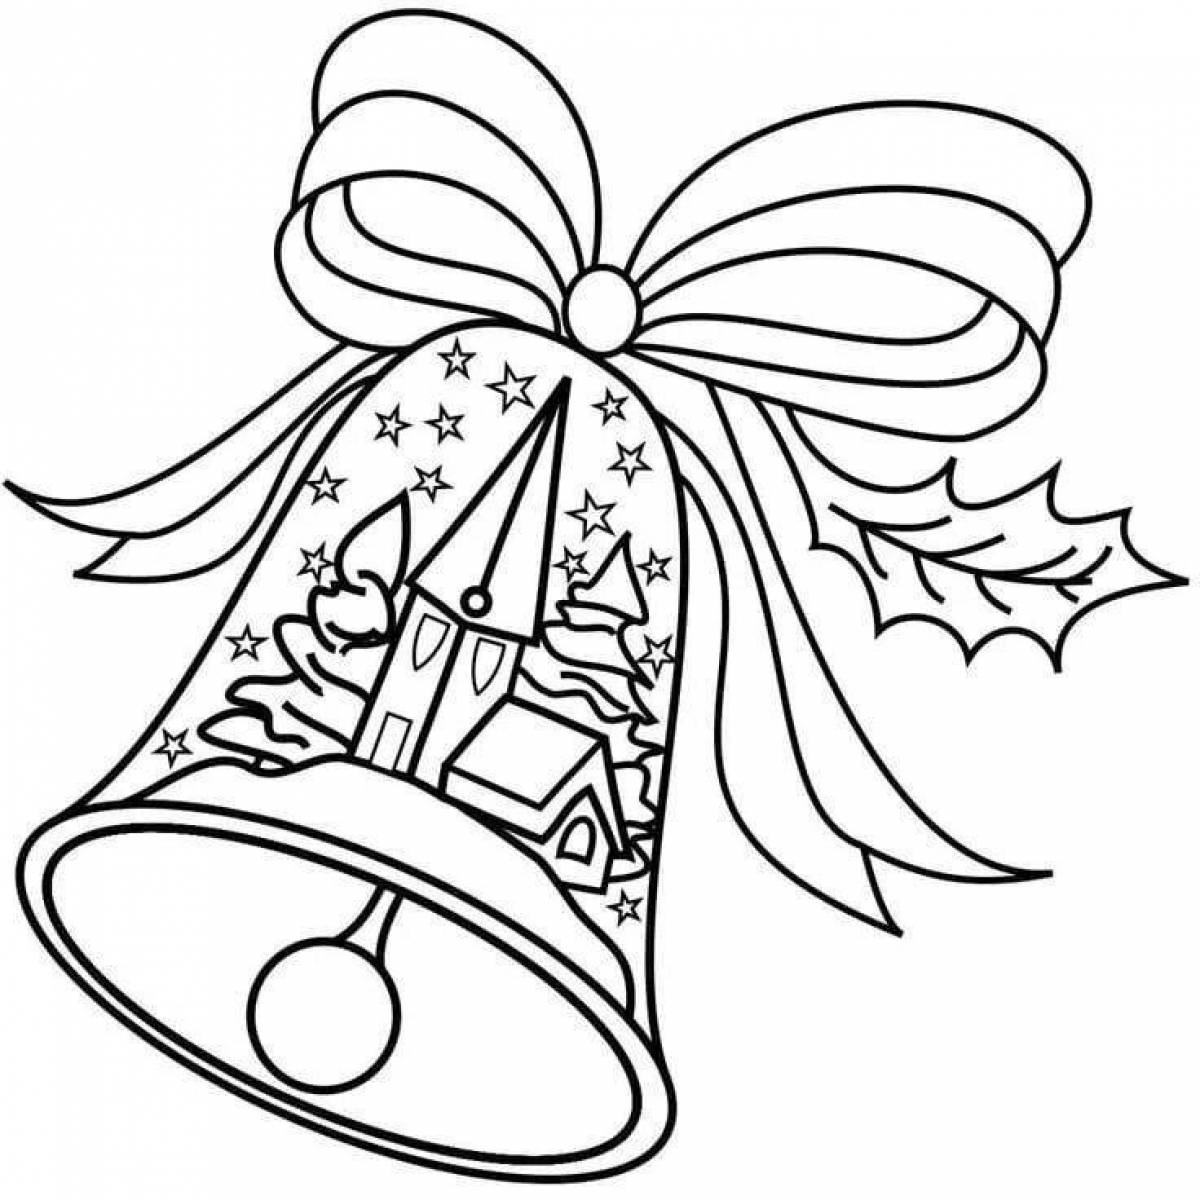 Coloring book magical Christmas bell